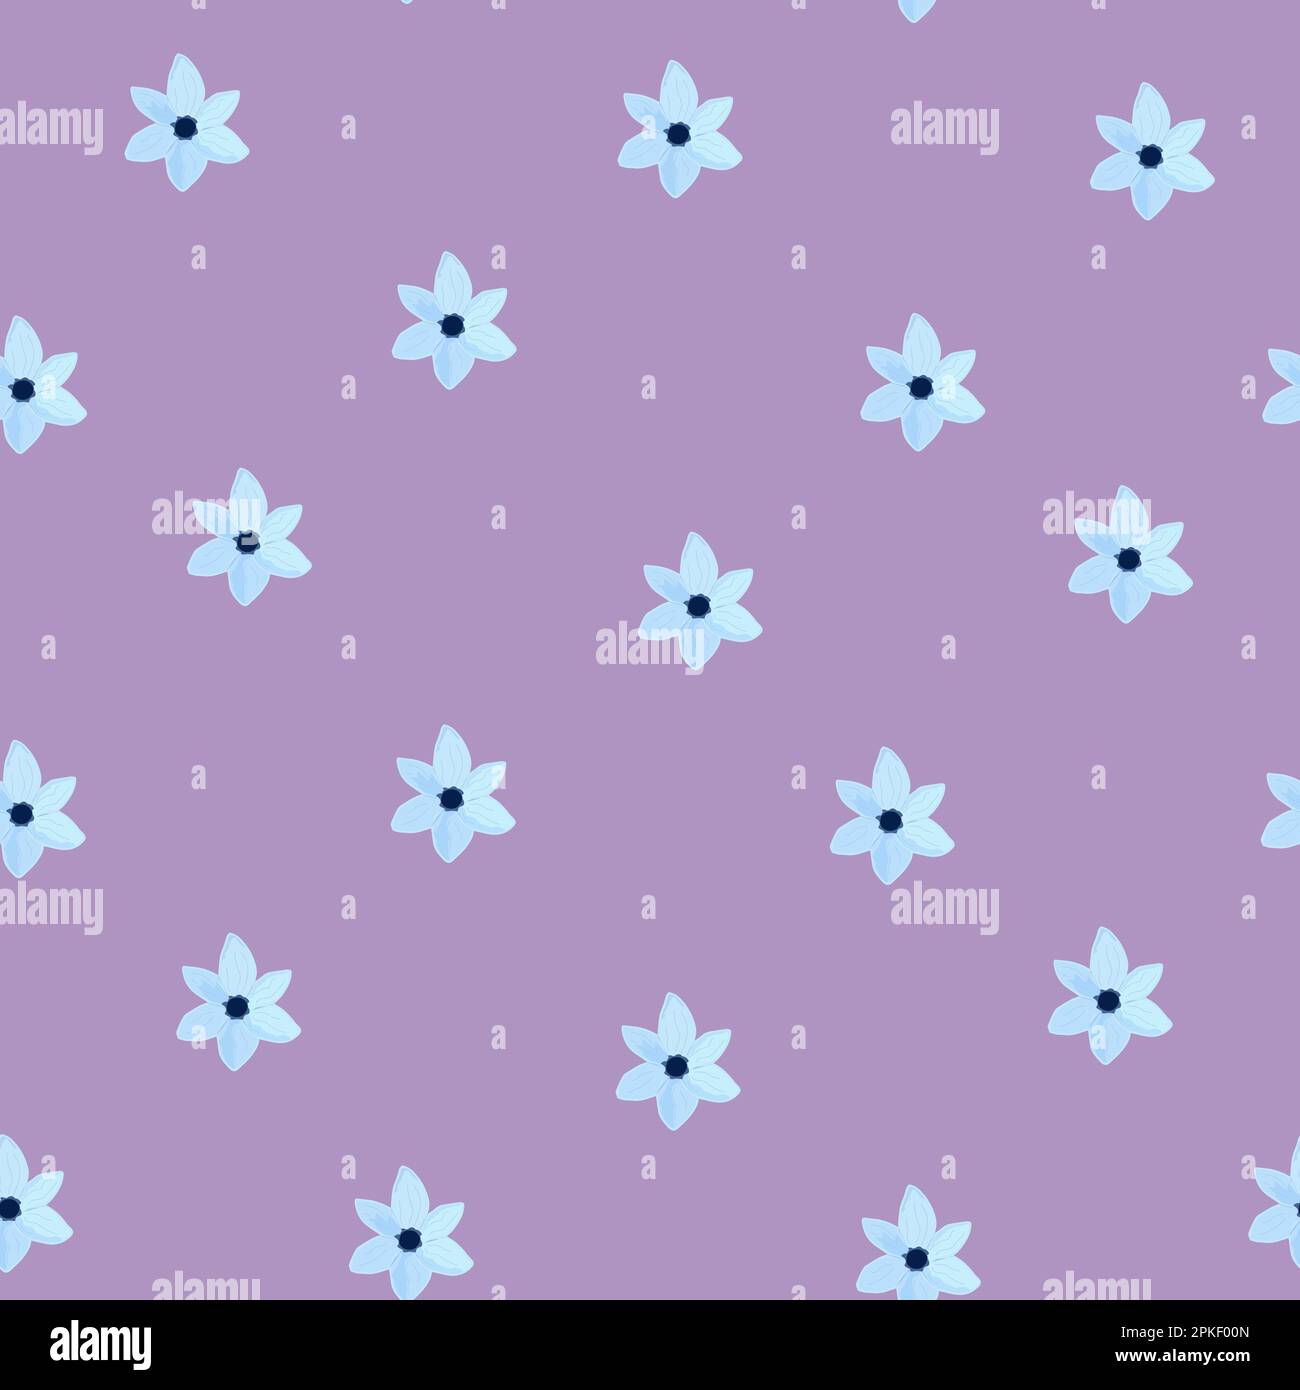 Light blue tender flowers on purple background seamless pattern. Hand drawn flower in repeating pattern for print and design Stock Vector